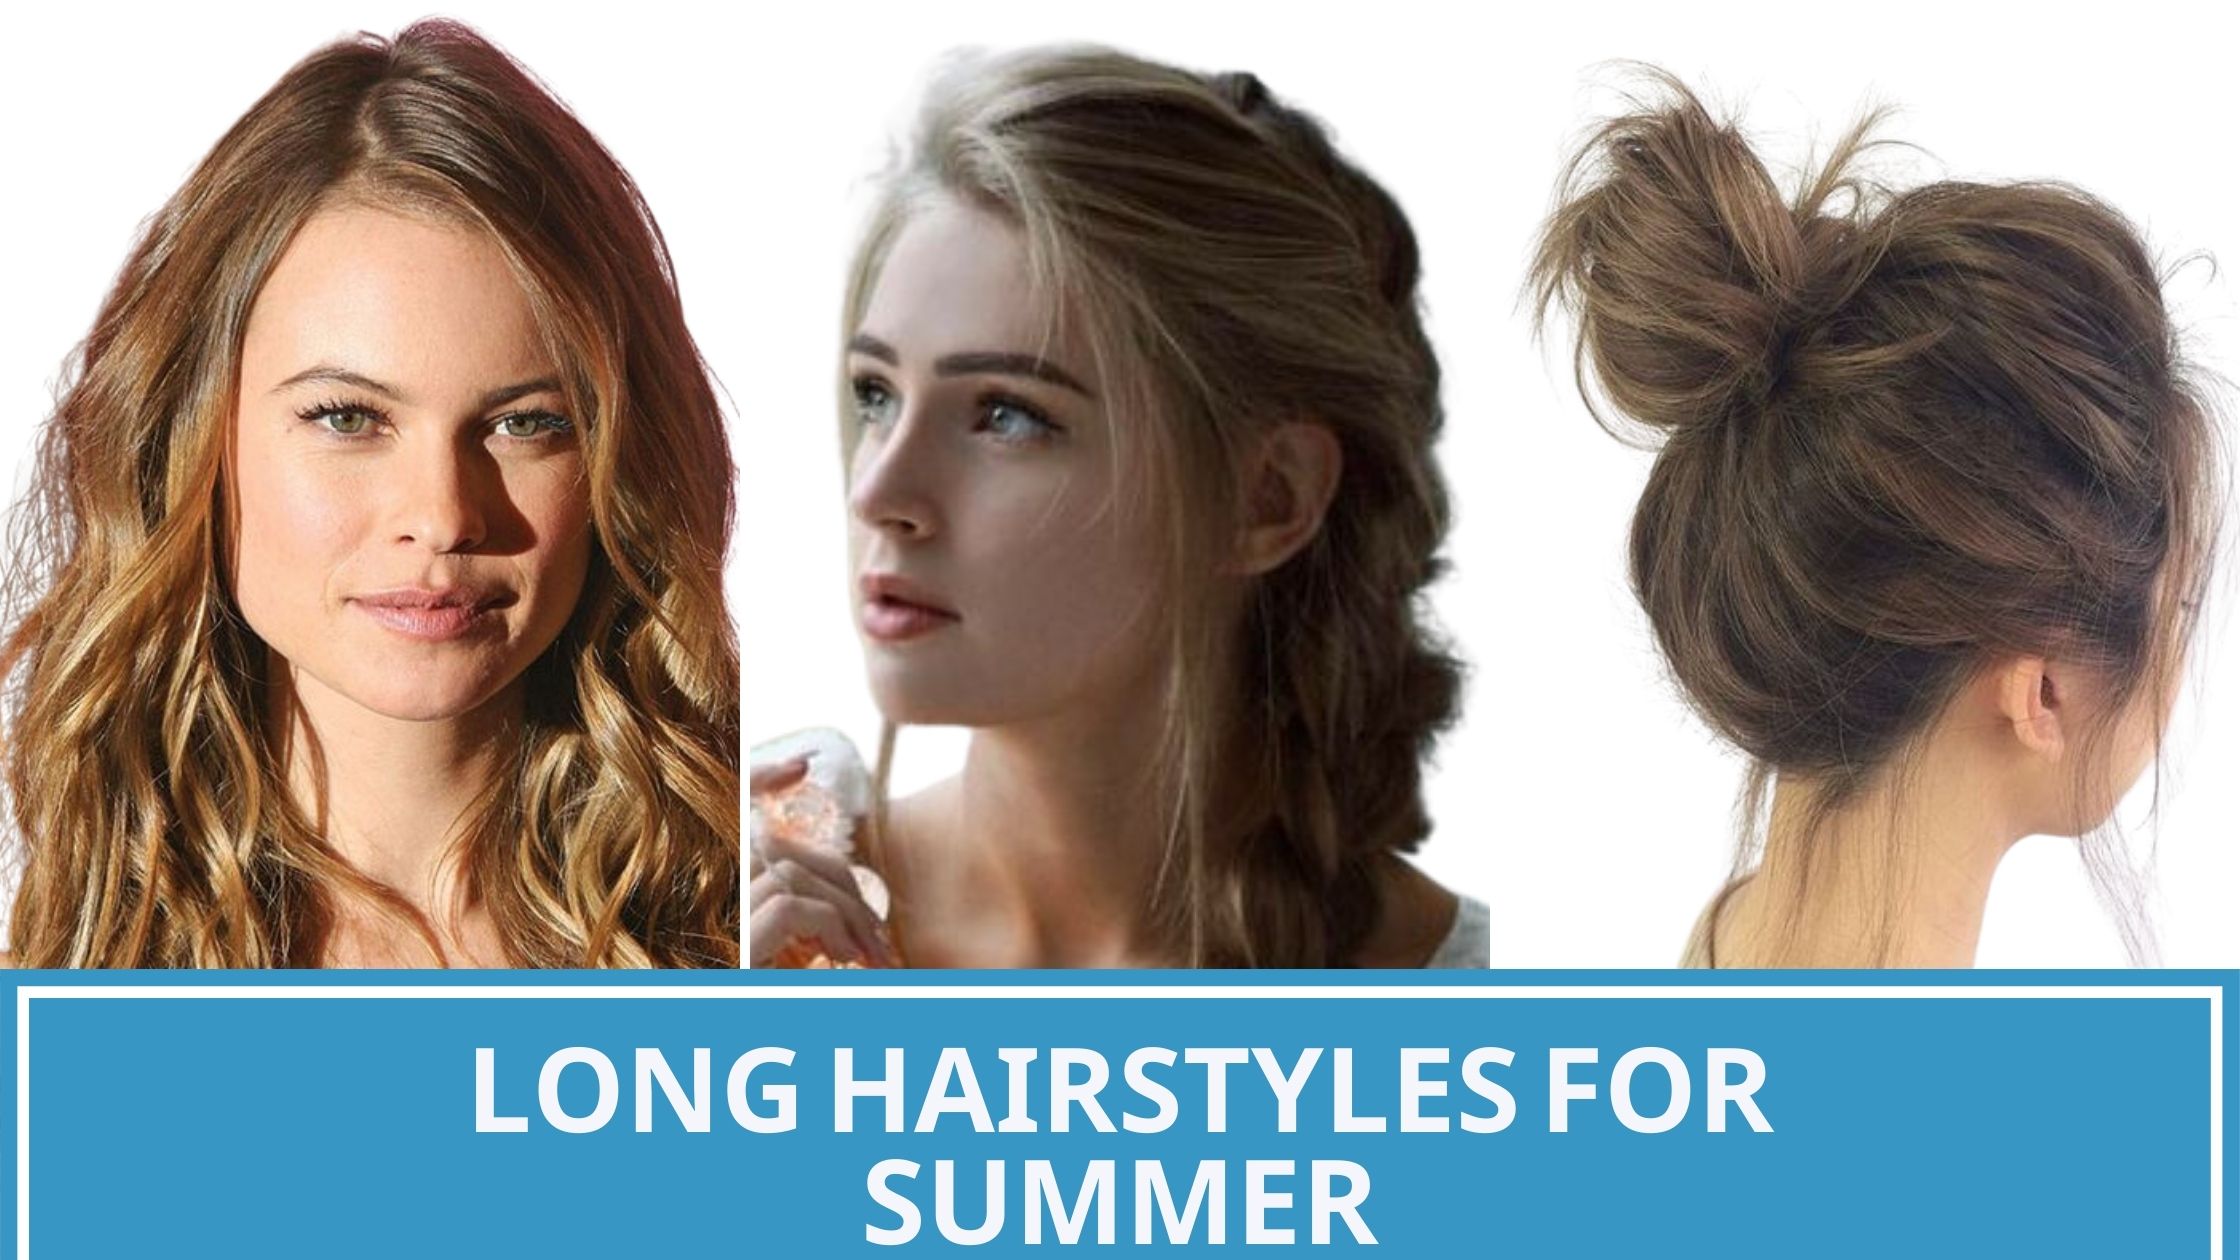 Long Hairstyles for Summer